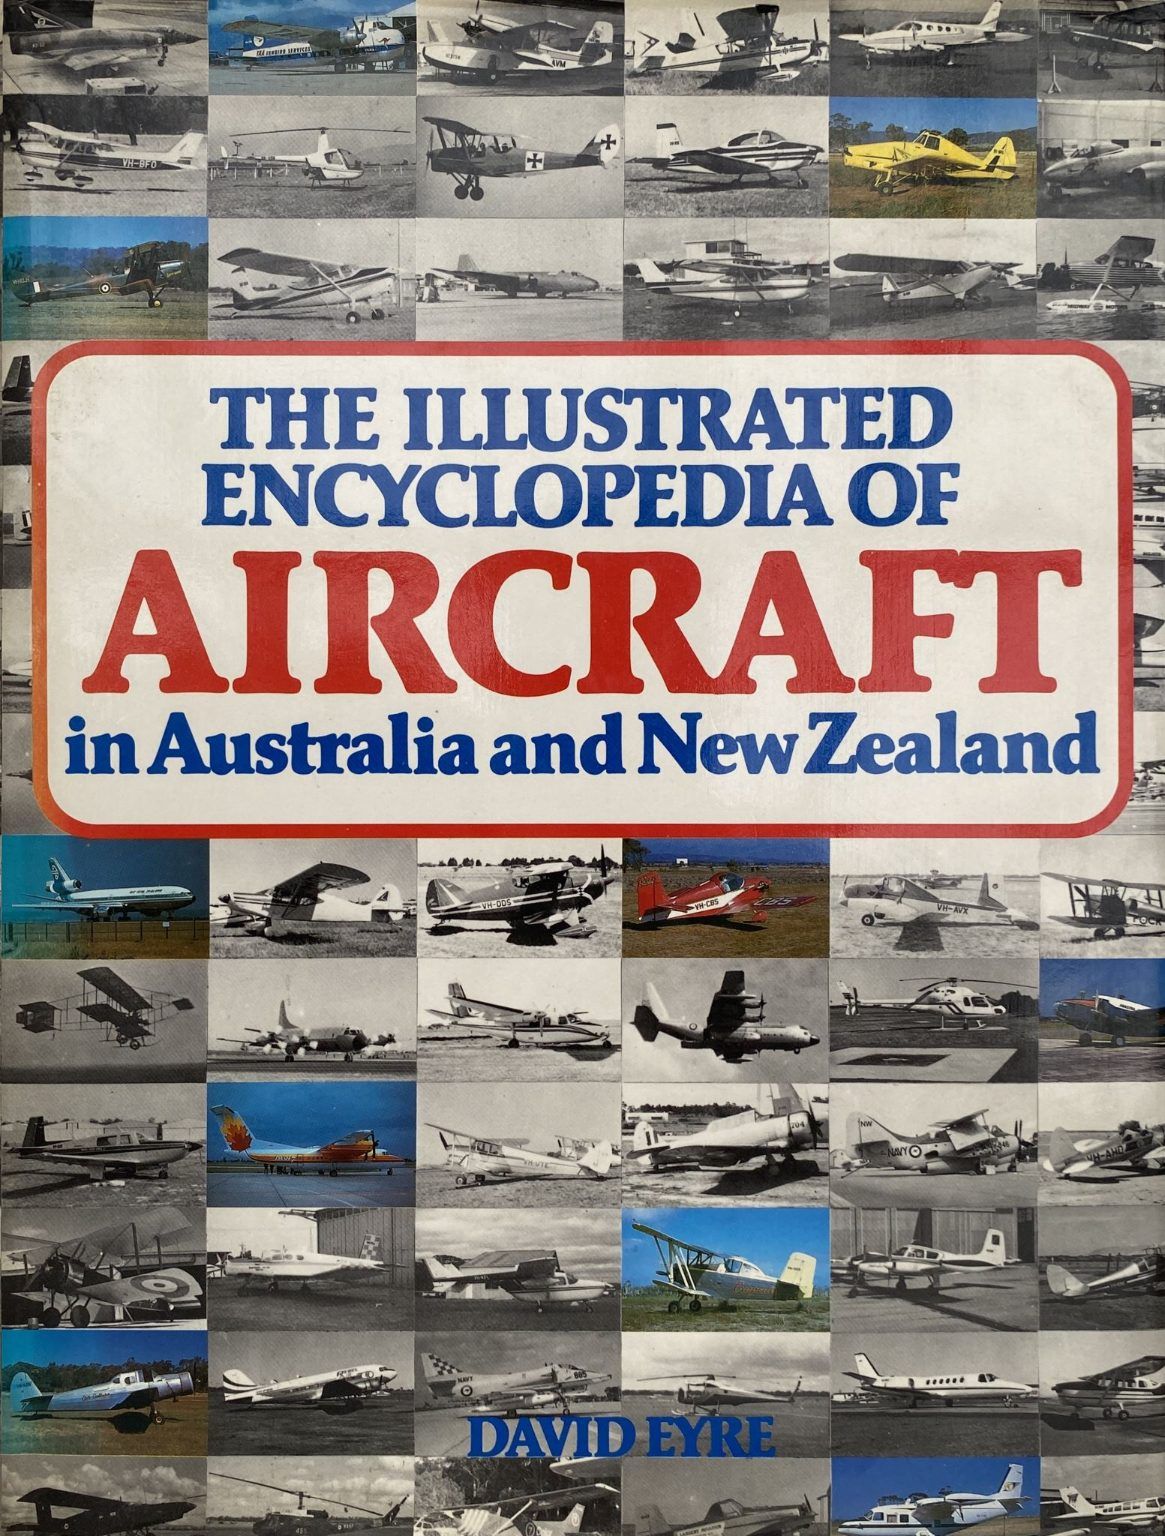 ILLUSTRATED ENCYCLOPEDIA OF AIRCRAFT in Australia and New Zealand